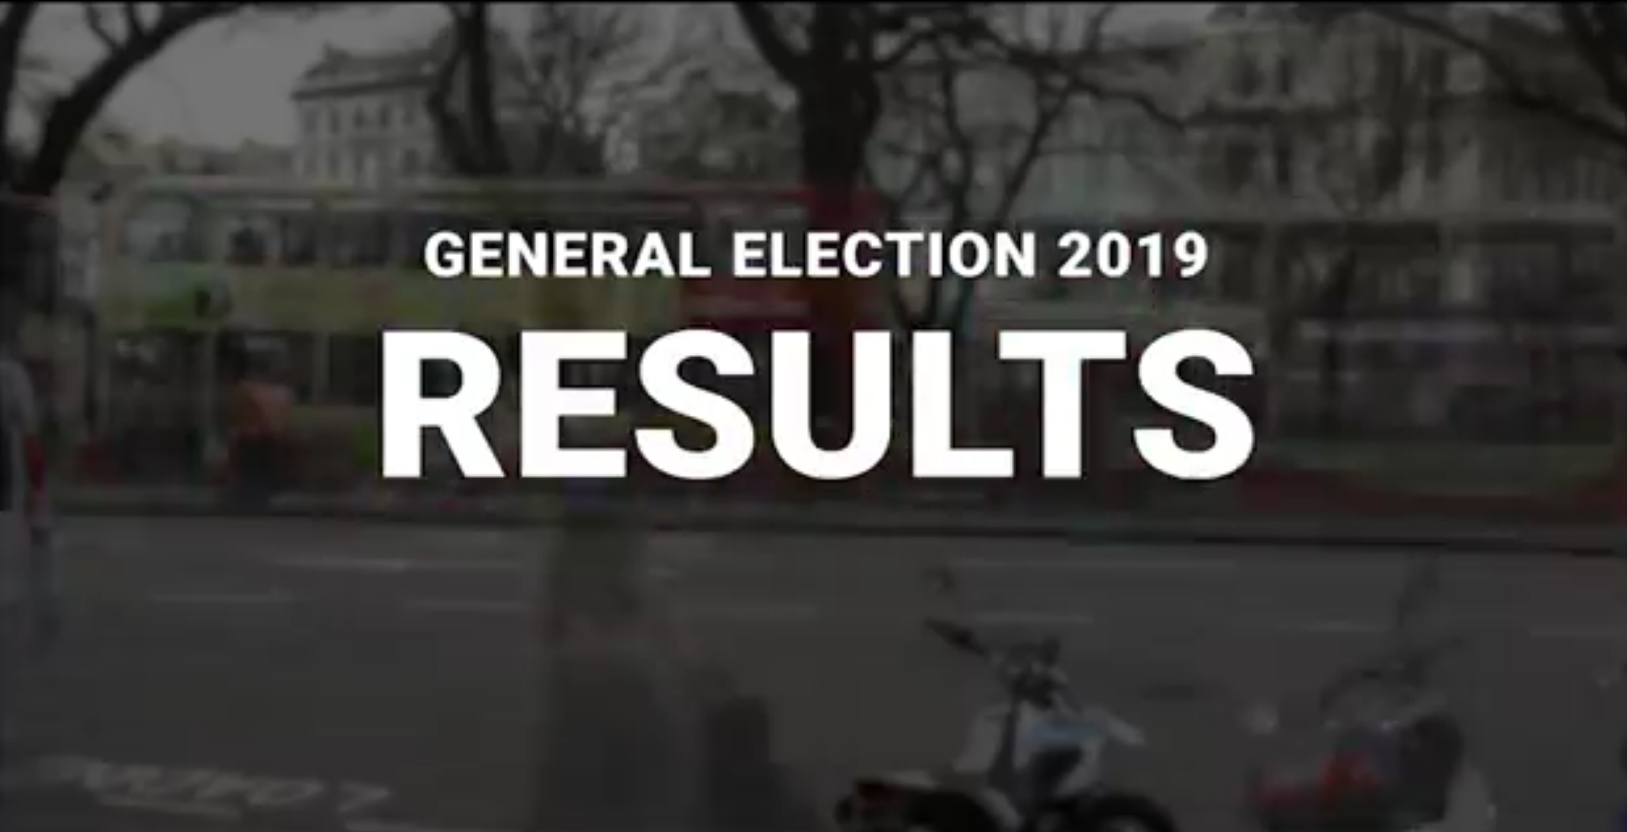 General Election 2019 Results